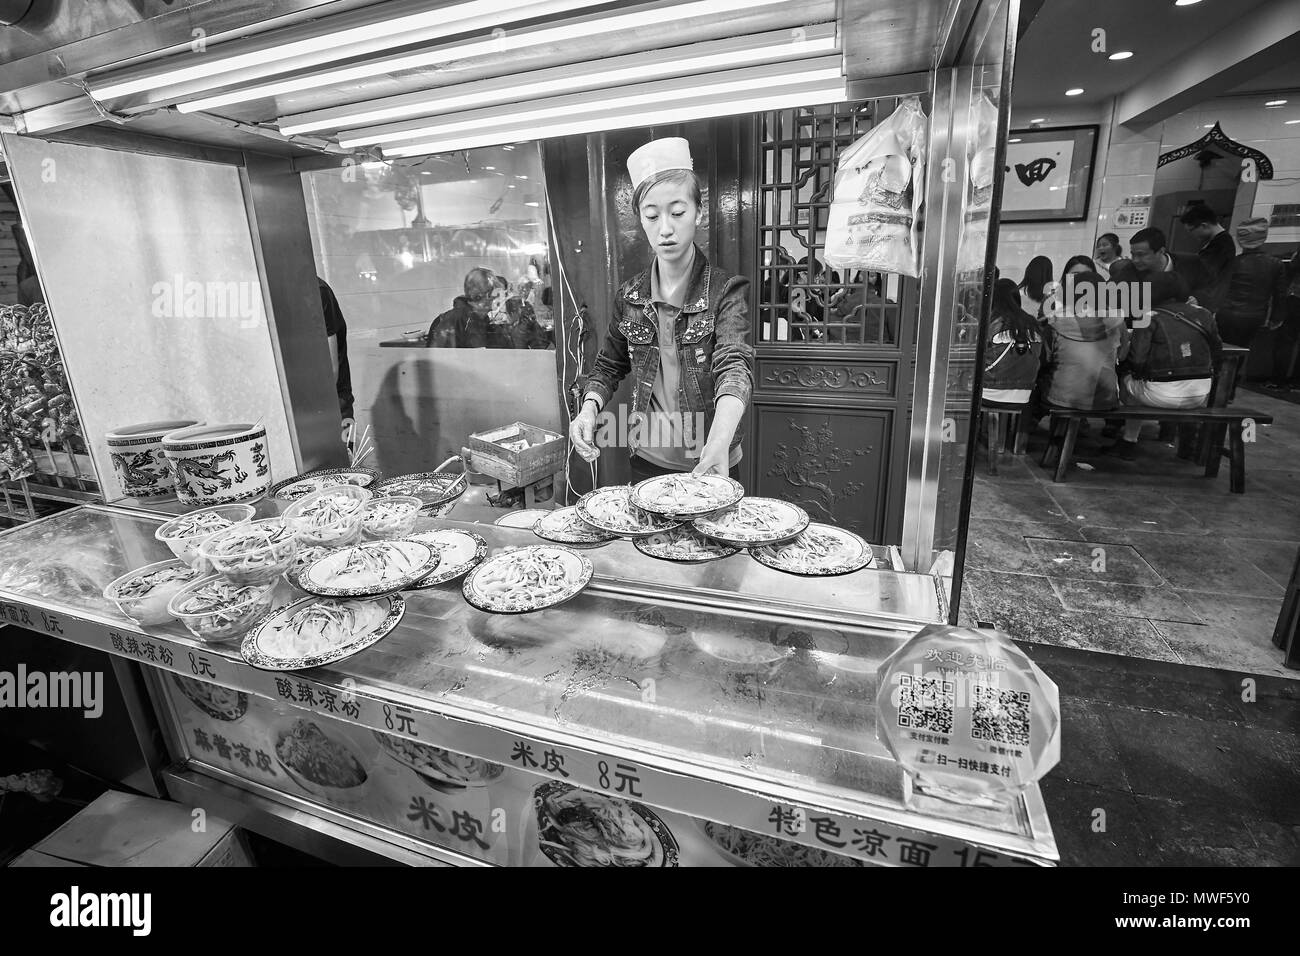 Xian, China - October 5, 2017: Street food vendor in the Muslim Quarter, well-known tourism site famous for its culture and food. Stock Photo